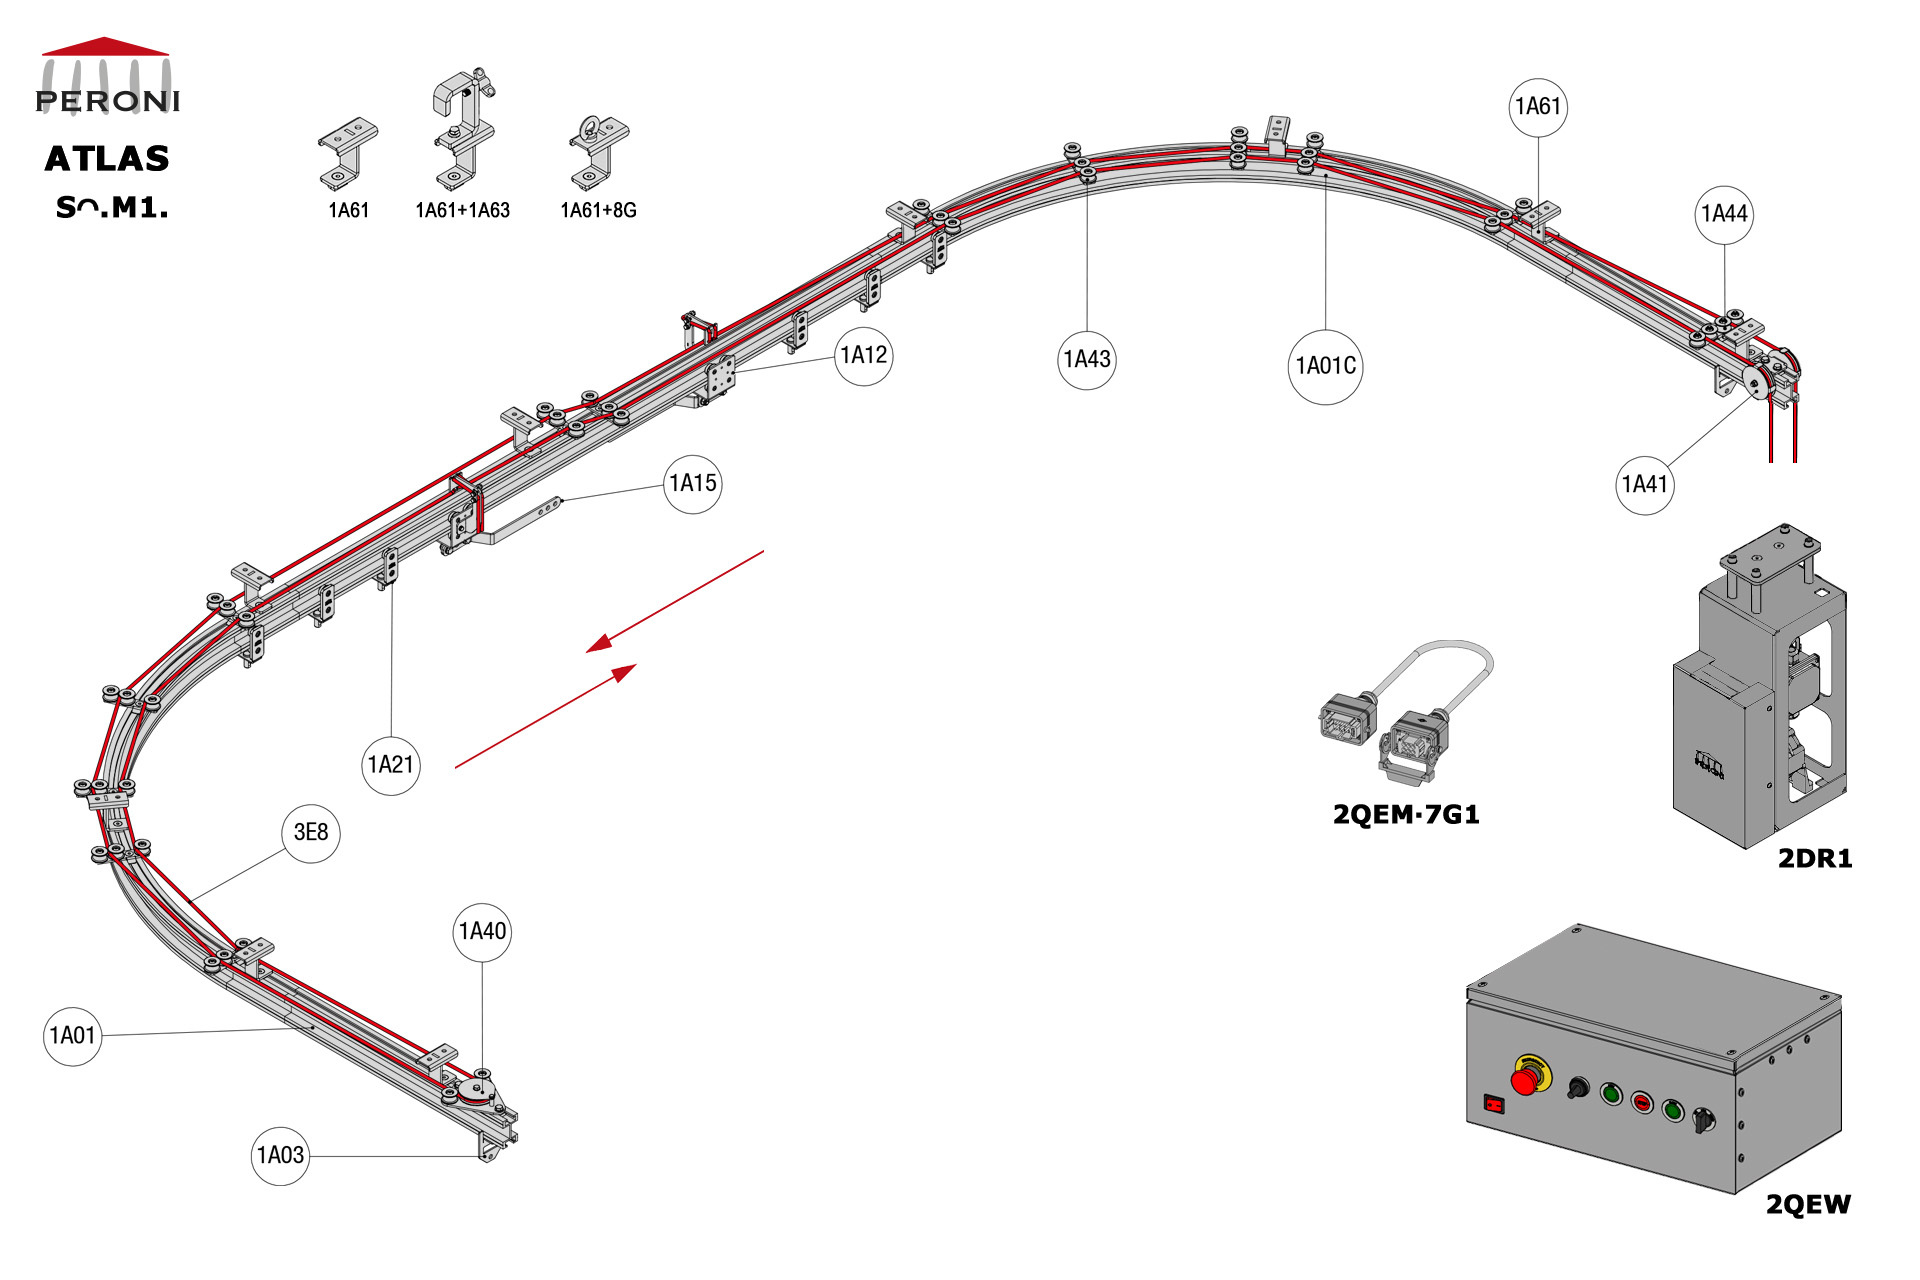 Sᴖ.M1. configuration track Sᴖ. Curved single rail central openingM1. Motorizedup to 50 cm central overlapComponenti 1A01 - Straight rail1A01C - Curved rail1A02 - Connection set1A03 - End stop1A12 - Top cord master carrier1A15 - Overlap arm1A20 - 2 Wheel runnerMotion control1A40 - Return pulley1A41 - Head double pulley1A43 - Top cord guide1A44 - Top cord aligner1A70 - Top cord limit switch with pulley1A71 - Top cord limit switch arm1A72 - Cord guide for limit switch2DR1-RDS2QEM-7G1-152QEW - Panou de comanda W 3E - Franghie Poly Ø 8 mm